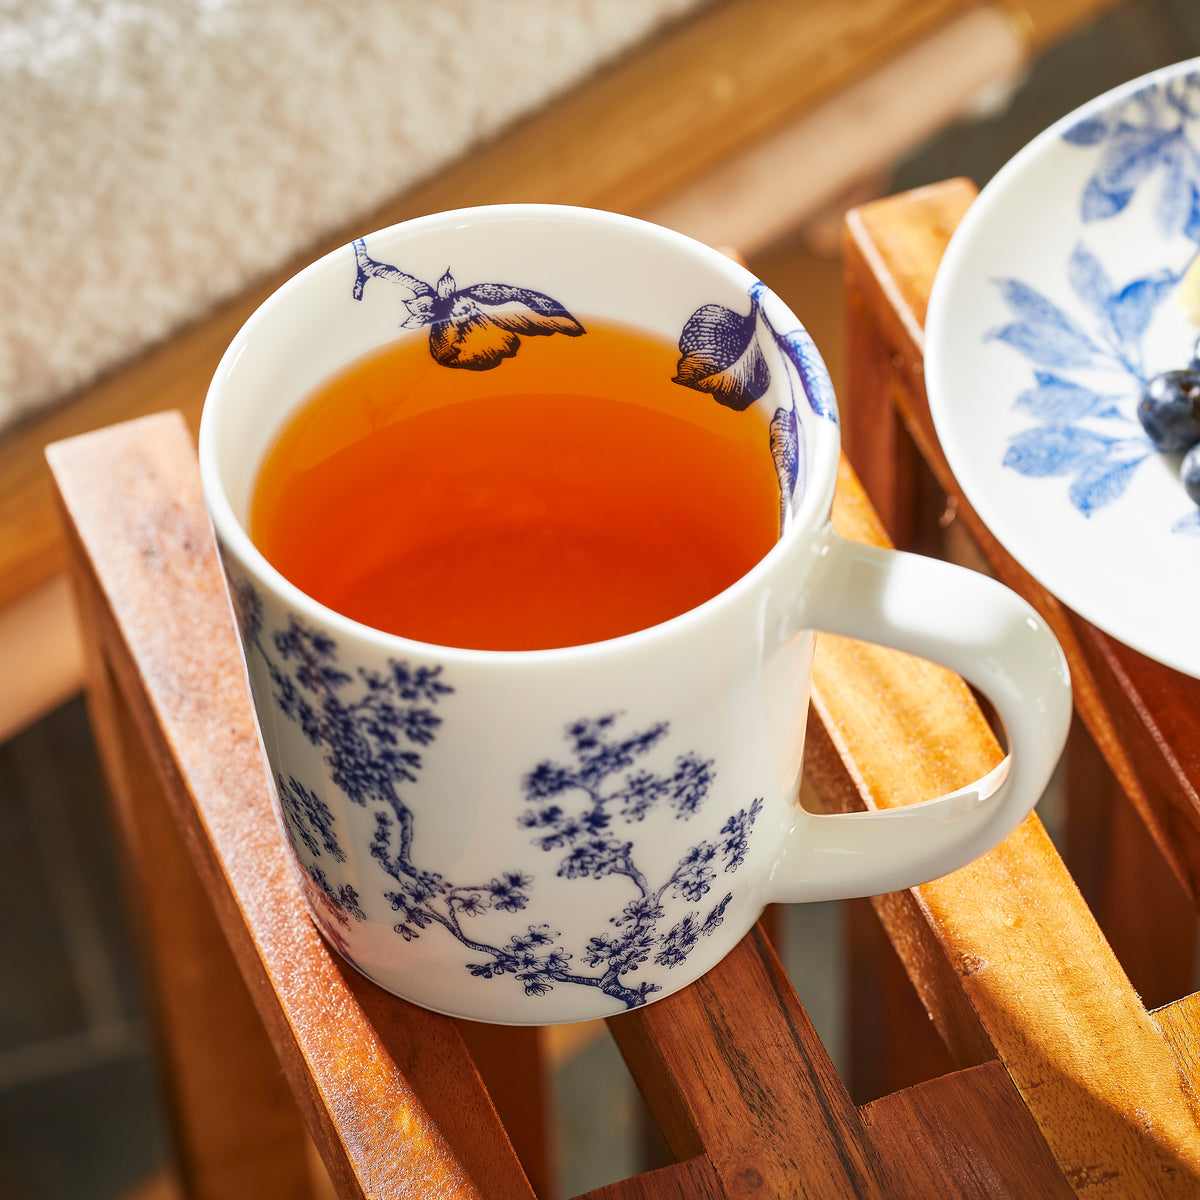 A Chinoiserie Toile Mug by Caskata Artisanal Home filled with tea is placed on a wooden surface next to a white plate with a matching Chinoiserie Toile pattern, embodying timeless elegance.